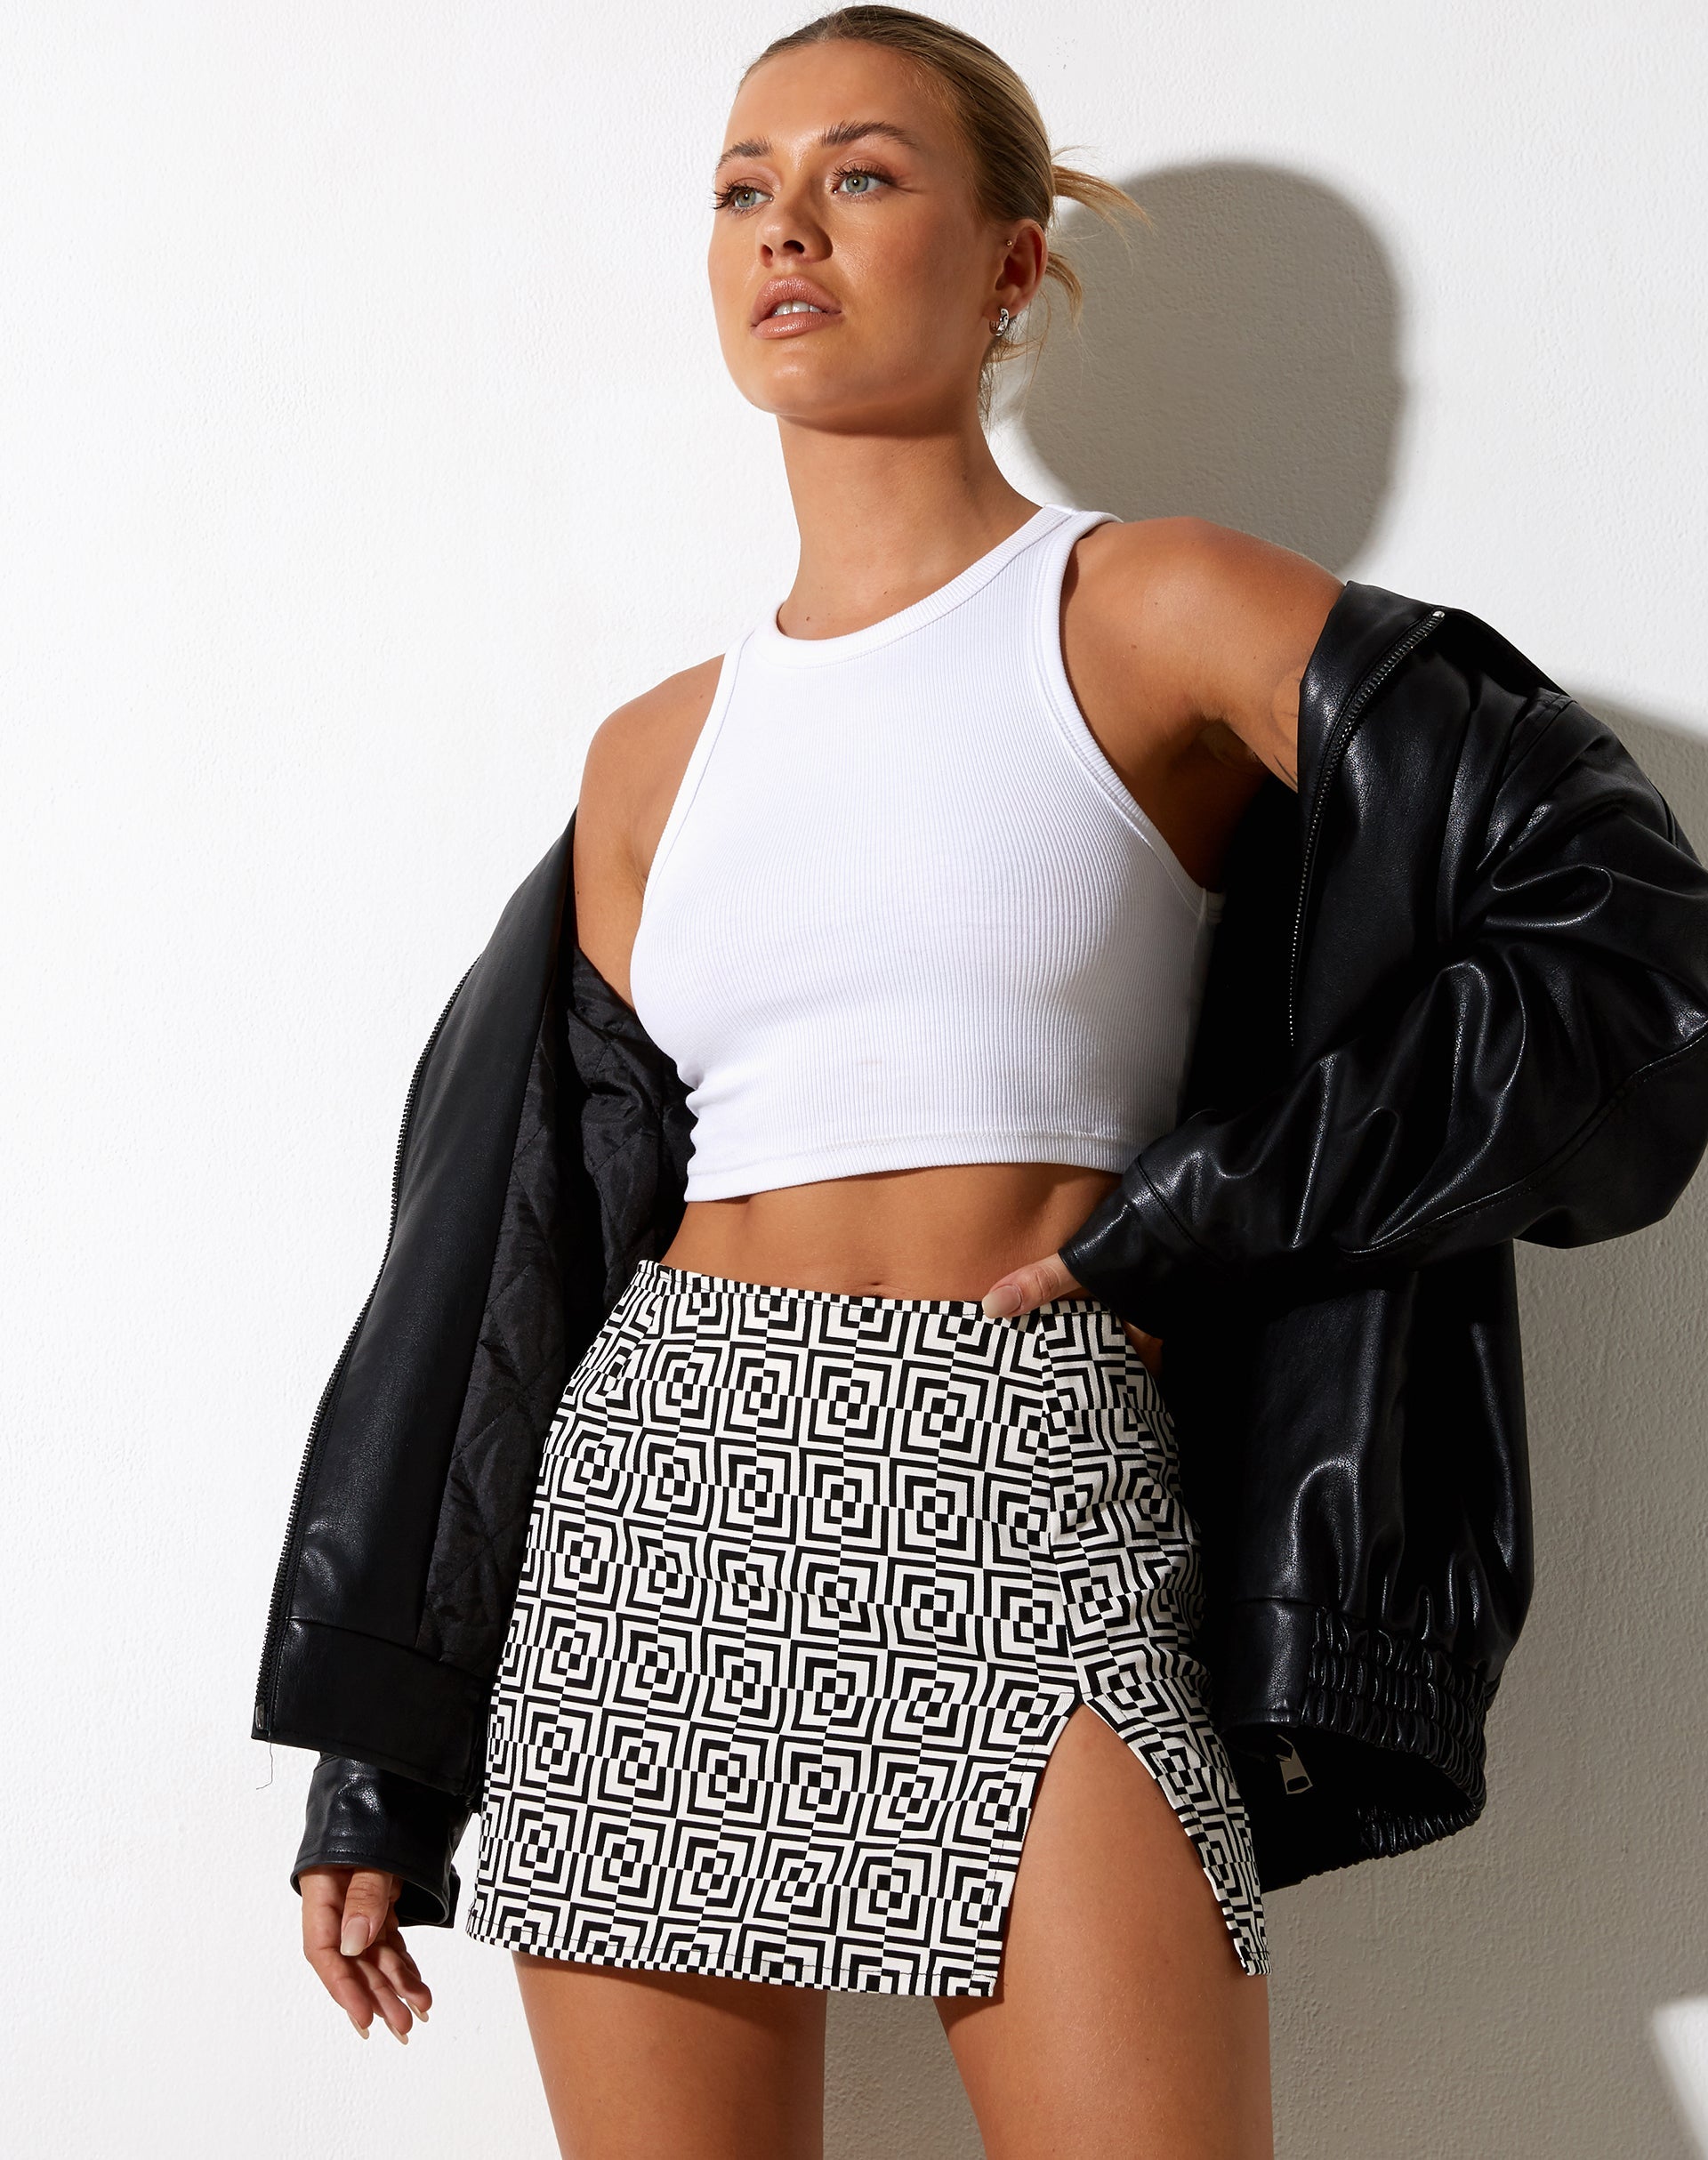 Image of Pelma Skirt in Optic Square Black and White